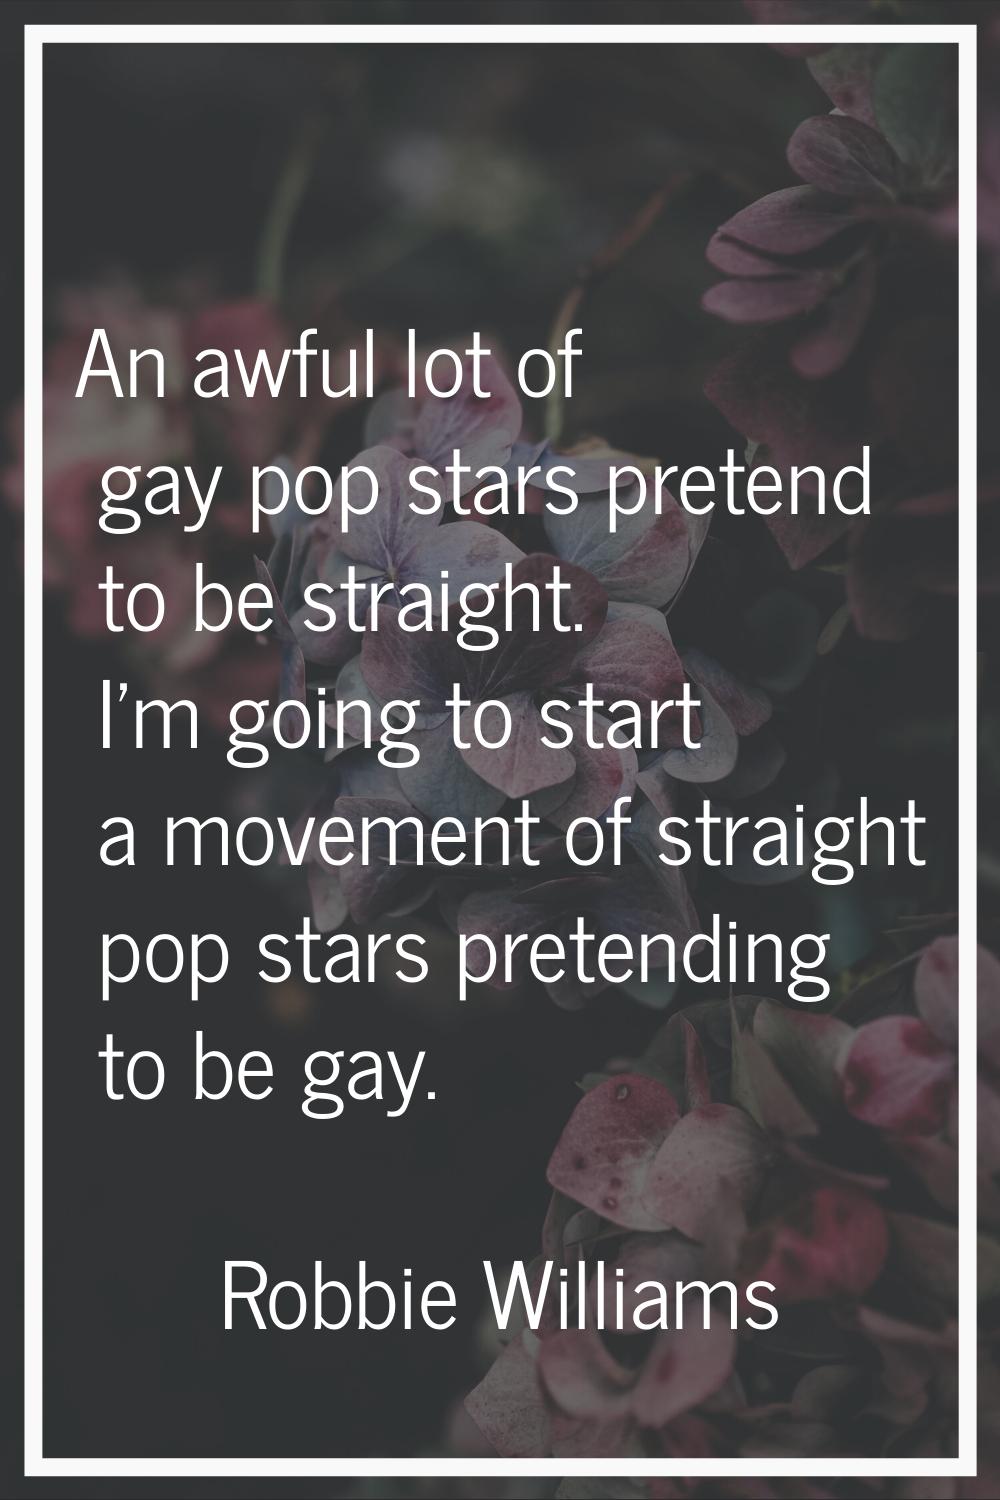 An awful lot of gay pop stars pretend to be straight. I'm going to start a movement of straight pop